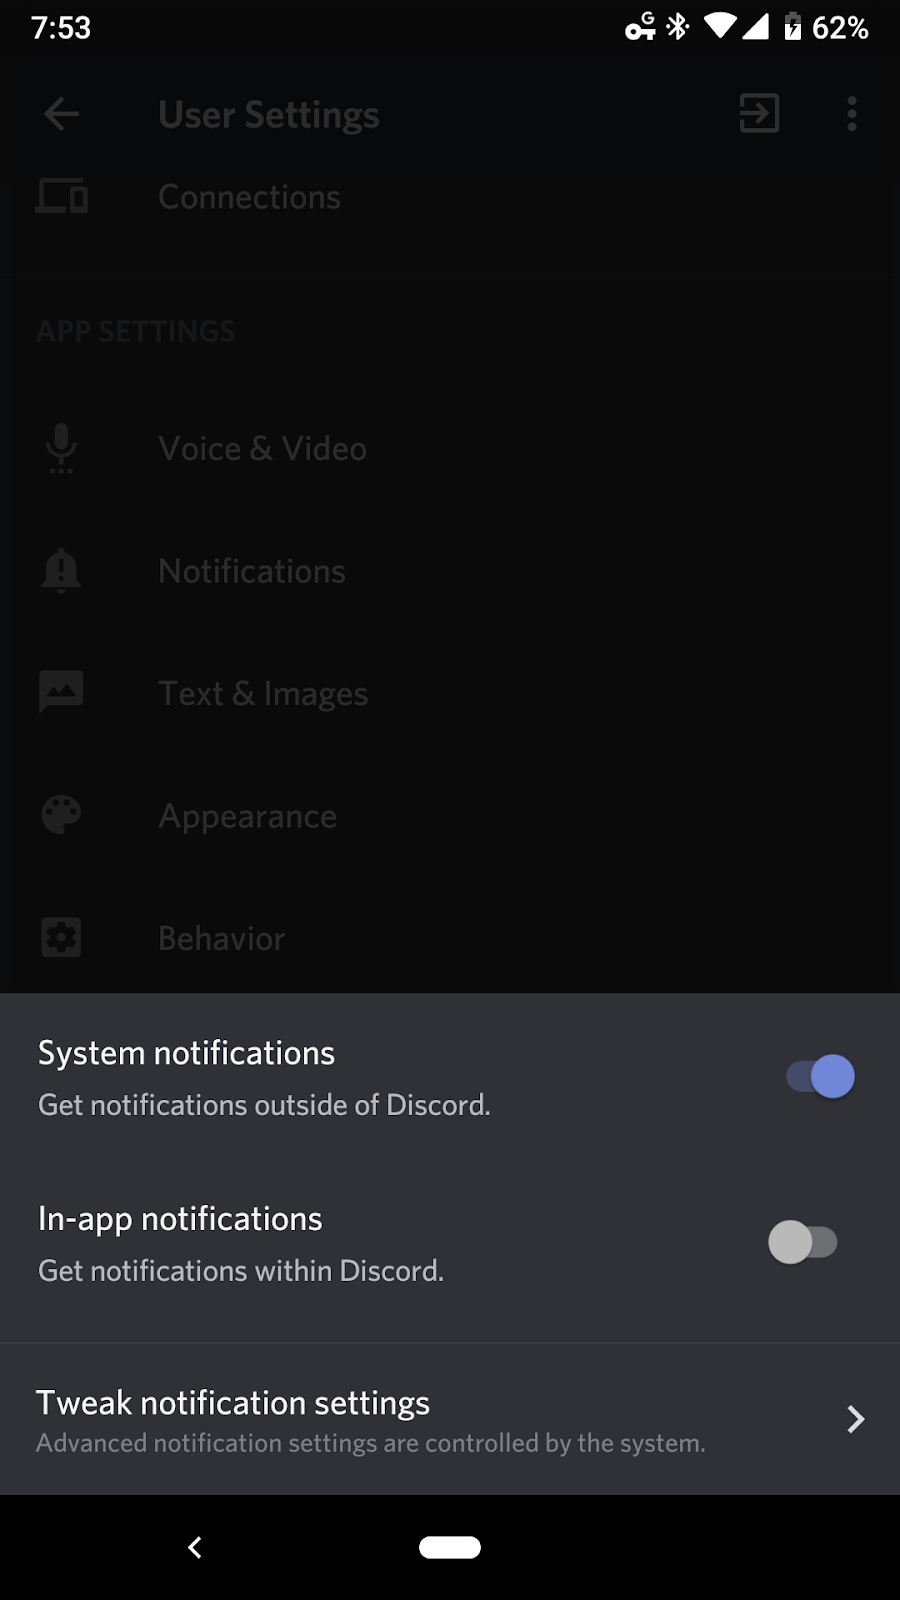  Turn On Notifications Within the Discord app